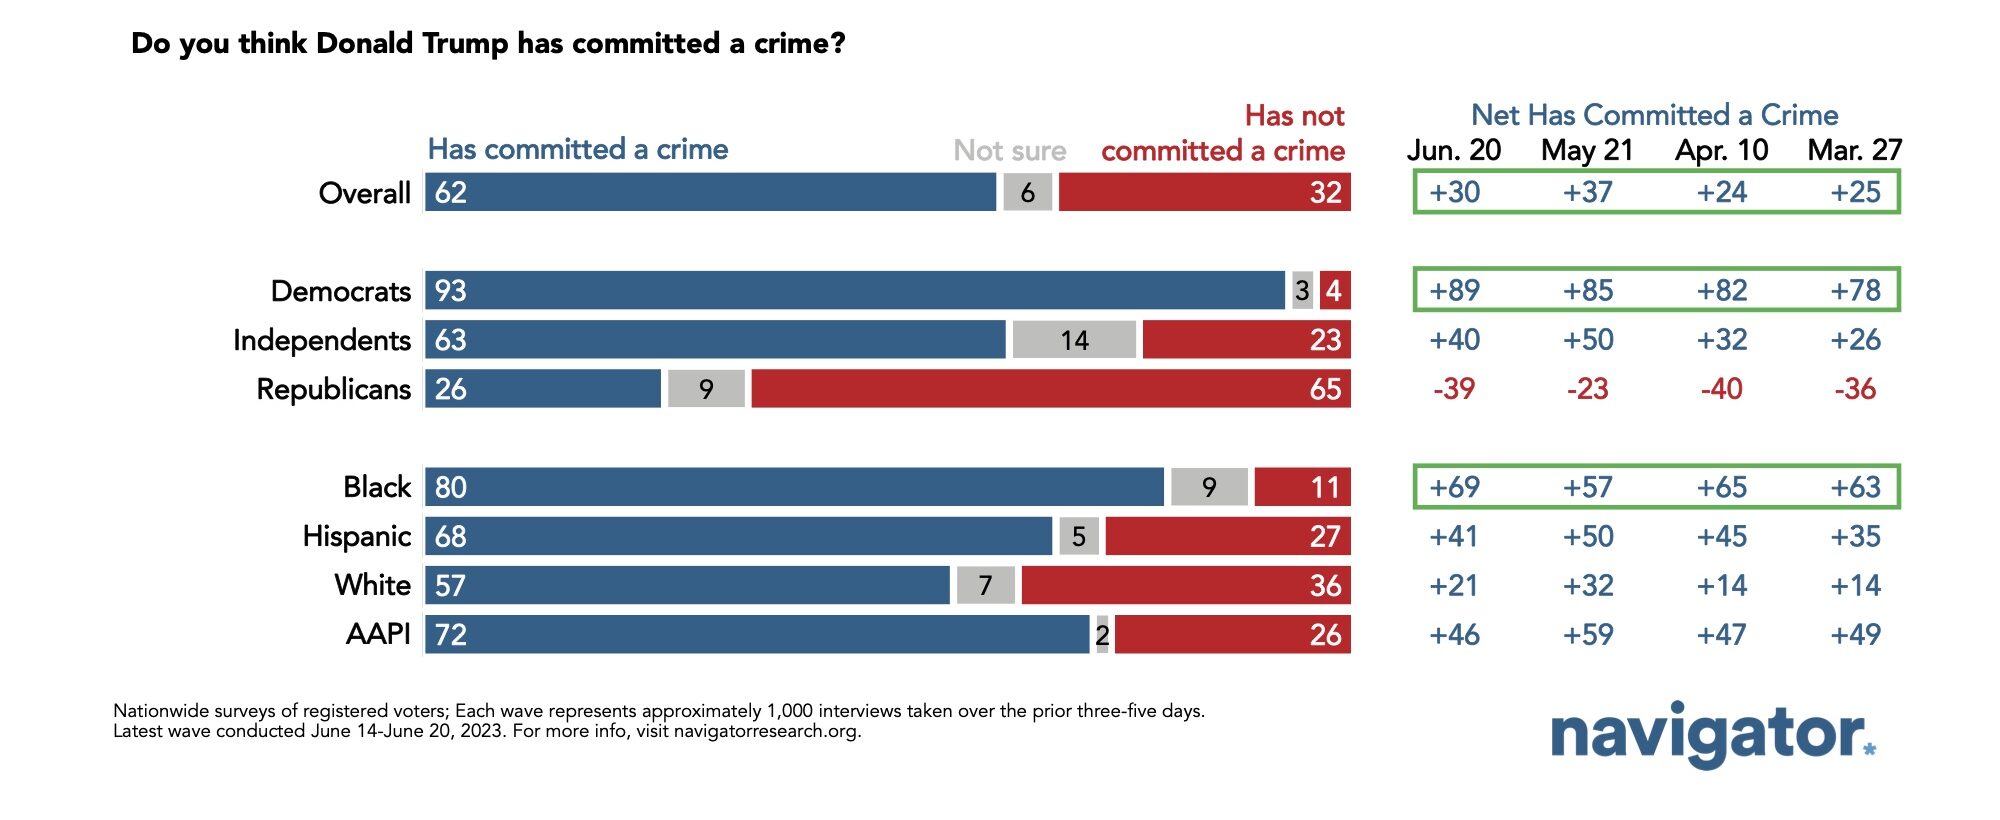 Bar graphs showing survey results to the following question after Donald Trump's indictment: Do you think Donald Trump has committed a crime?